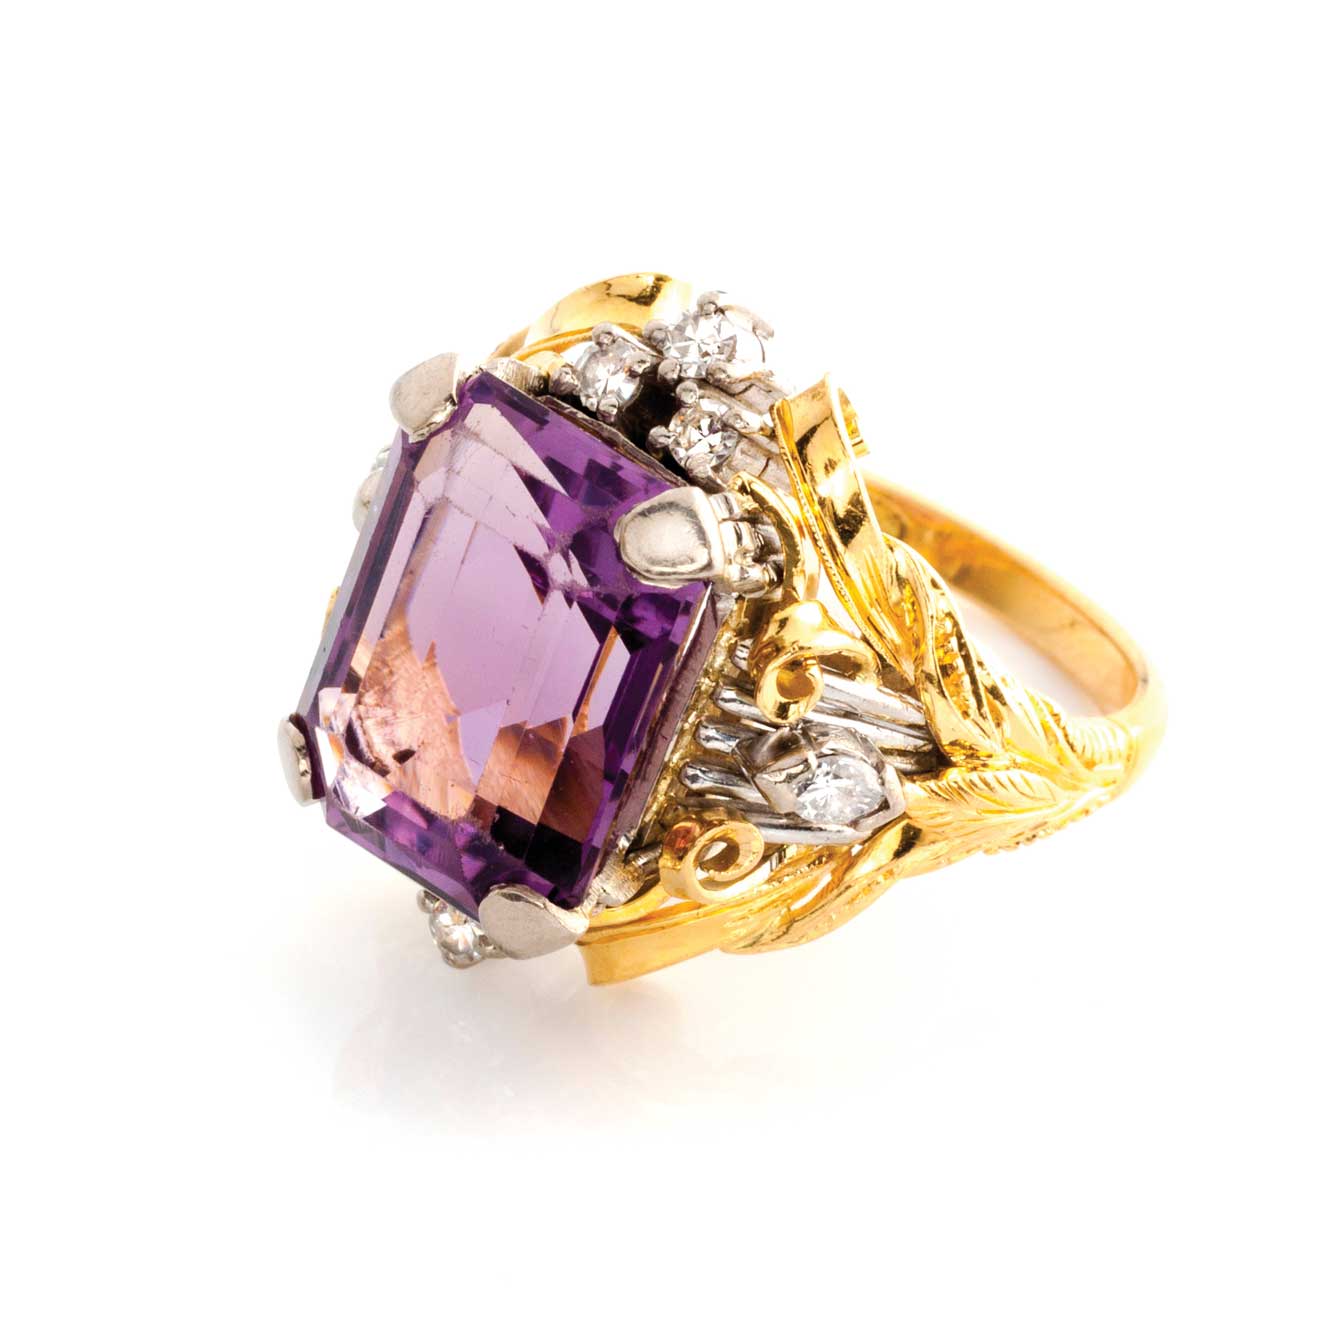 AN AMETHYST AND DIAMOND RING Claw set to the centre with an emerald-cut amethyst weighing